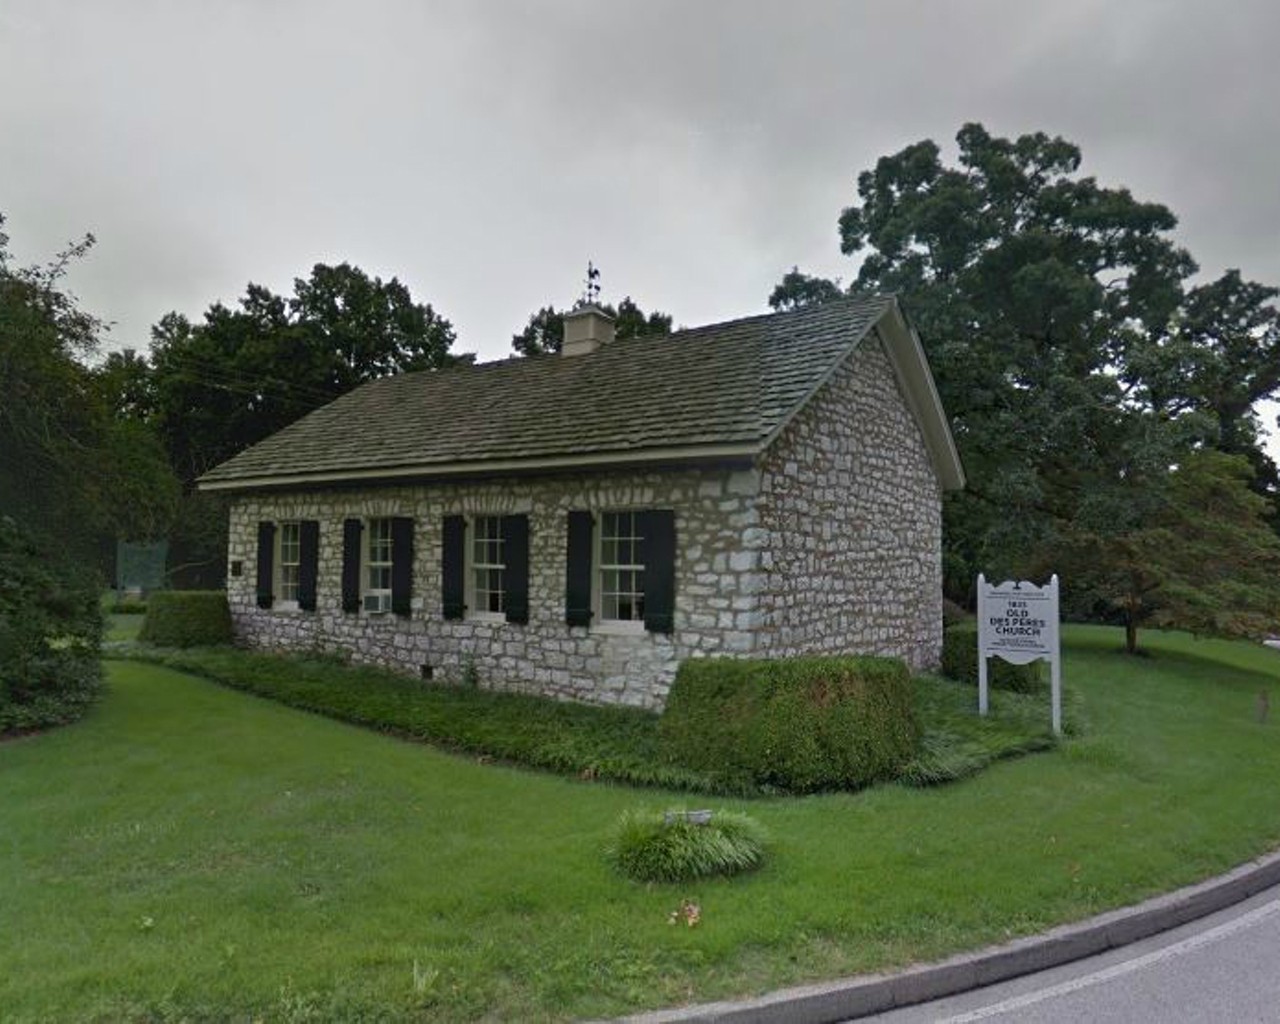 Old Stone Meeting House
2320 N. Geyer Road, 314-432-8029
Though the location goes by the name &#147;Old Des Peres Church&#148; now, it was nicknamed the Old Stone Meeting House. The church was built by settlers in 1834, but it would serve as an important stop along the Underground Railroad just a few decades later. It was added to the National Register of Historic Places in 1978.
Photo courtesy of Google Maps